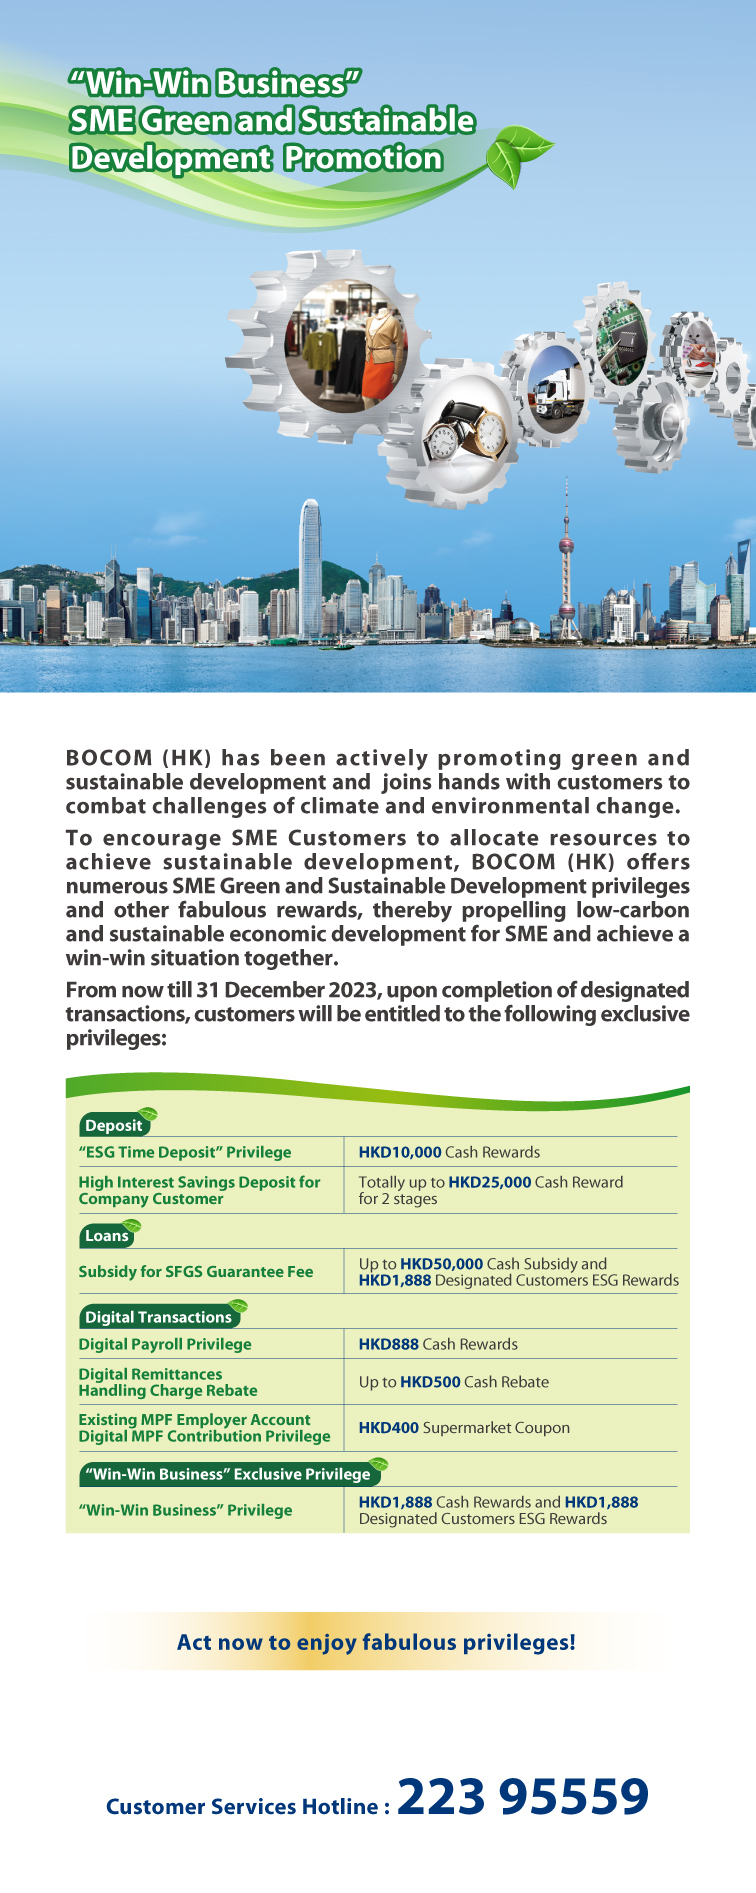 “win-win business”sme green and sustainable development promotion  bocom (hong kong) has been actively promoting green and sustainable development and  joins hands with customers to combat challenges of climate and environmental change.  to encourage sme customers to allocate resources to achieve sustainable development, bocom (hong kong) offers numerous sme green and sustainable development privileges and other fabulous rewards, thereby propelling low-carbon and sustainable economic development for sme and achieve a win-win situation together.  from now till 31st december 2023, upon completion of designated transactions, customers will be entitled to the following exclusive privileges:  deposit  “esg time deposit”privilege	hkd10,000 cash rewards high interest savings deposit for company customer	totally up to hkd25,000 cash reward for 2 stages  loans   subsidy for sfgs guarantee fee 	up to hkd50,000 cash subsidy and hkd1,888 designated customers esg rewards   digital transactions  digital payroll privilege	hkd888 cash rewards  digital remittances handling charge rebate	up to hkd500 cash rebate  existing mpf employer account digital mpf contribution privilege	hkd400 supermarket coupon  “win-win business” exclusive privilege “win-win business” privilege	hkd1,888 cash rewards and hkd1,888 designated customers esg rewards   act now to enjoy fabulous privileges! 